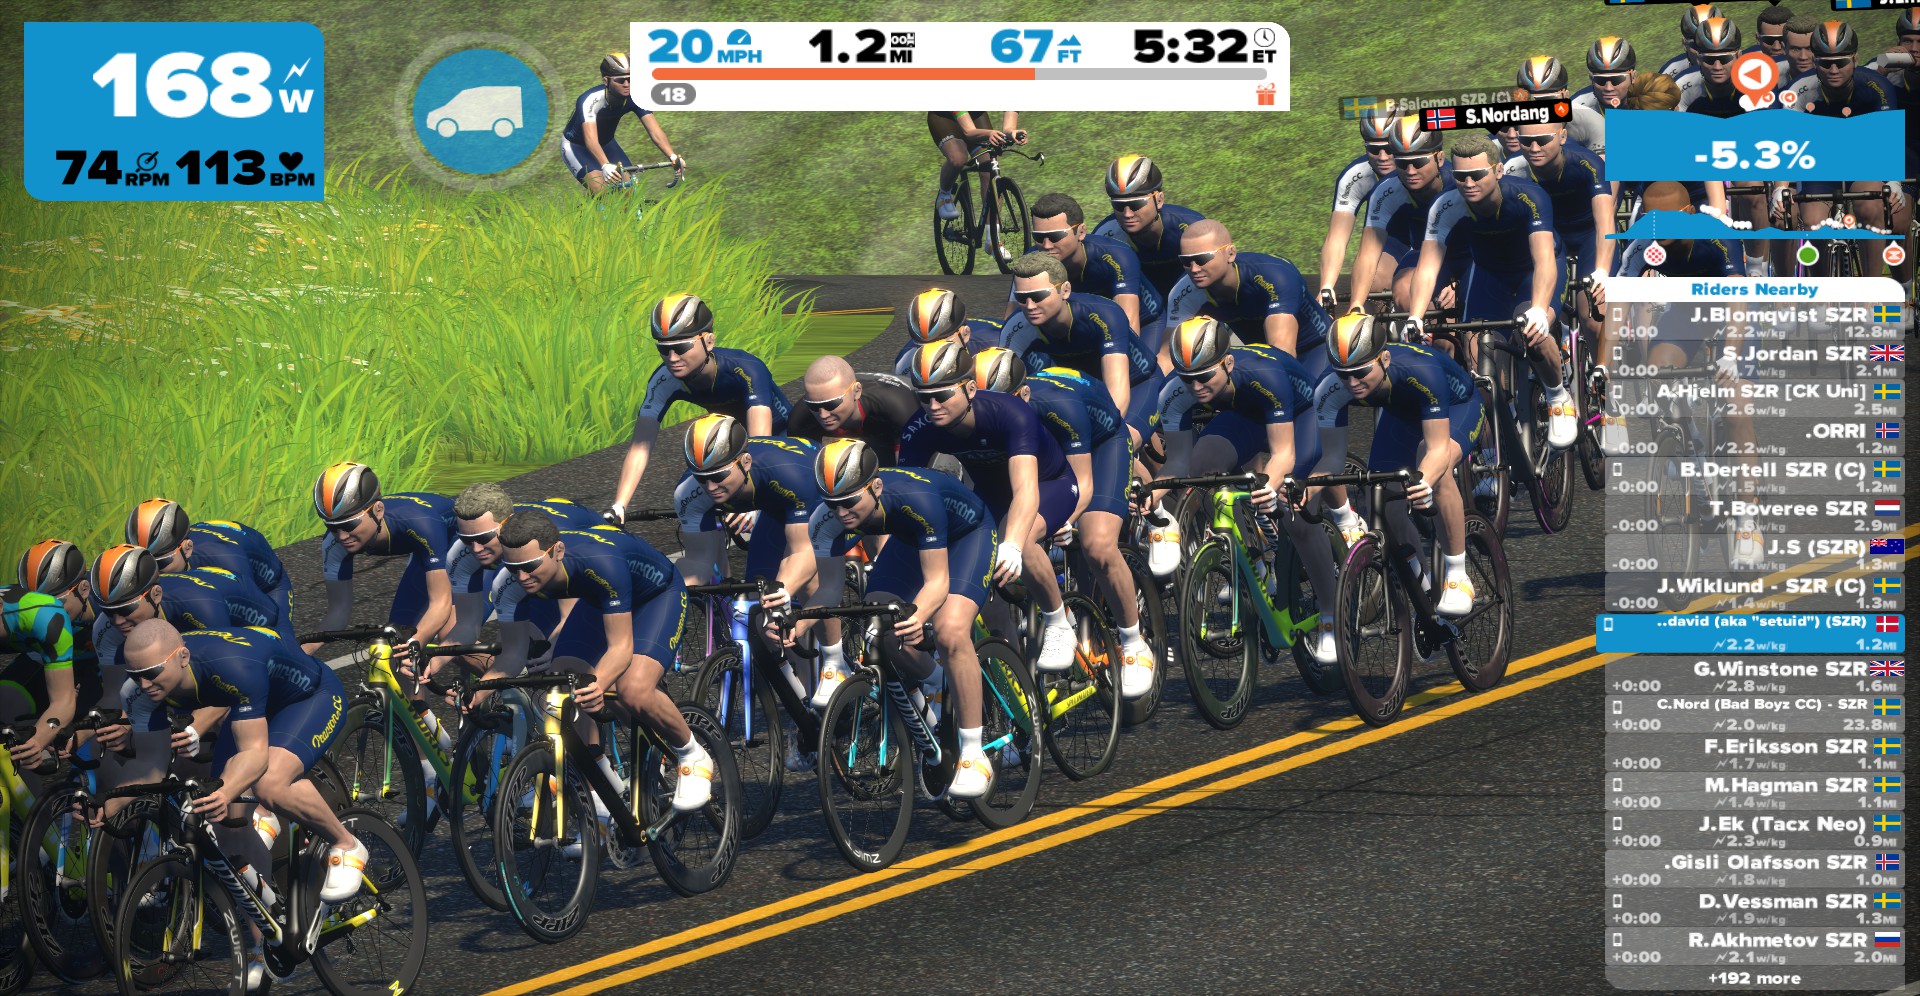 http://kb.zwiftriders.com/sites/default/files/inline-images/zwift-group-ride.jpg